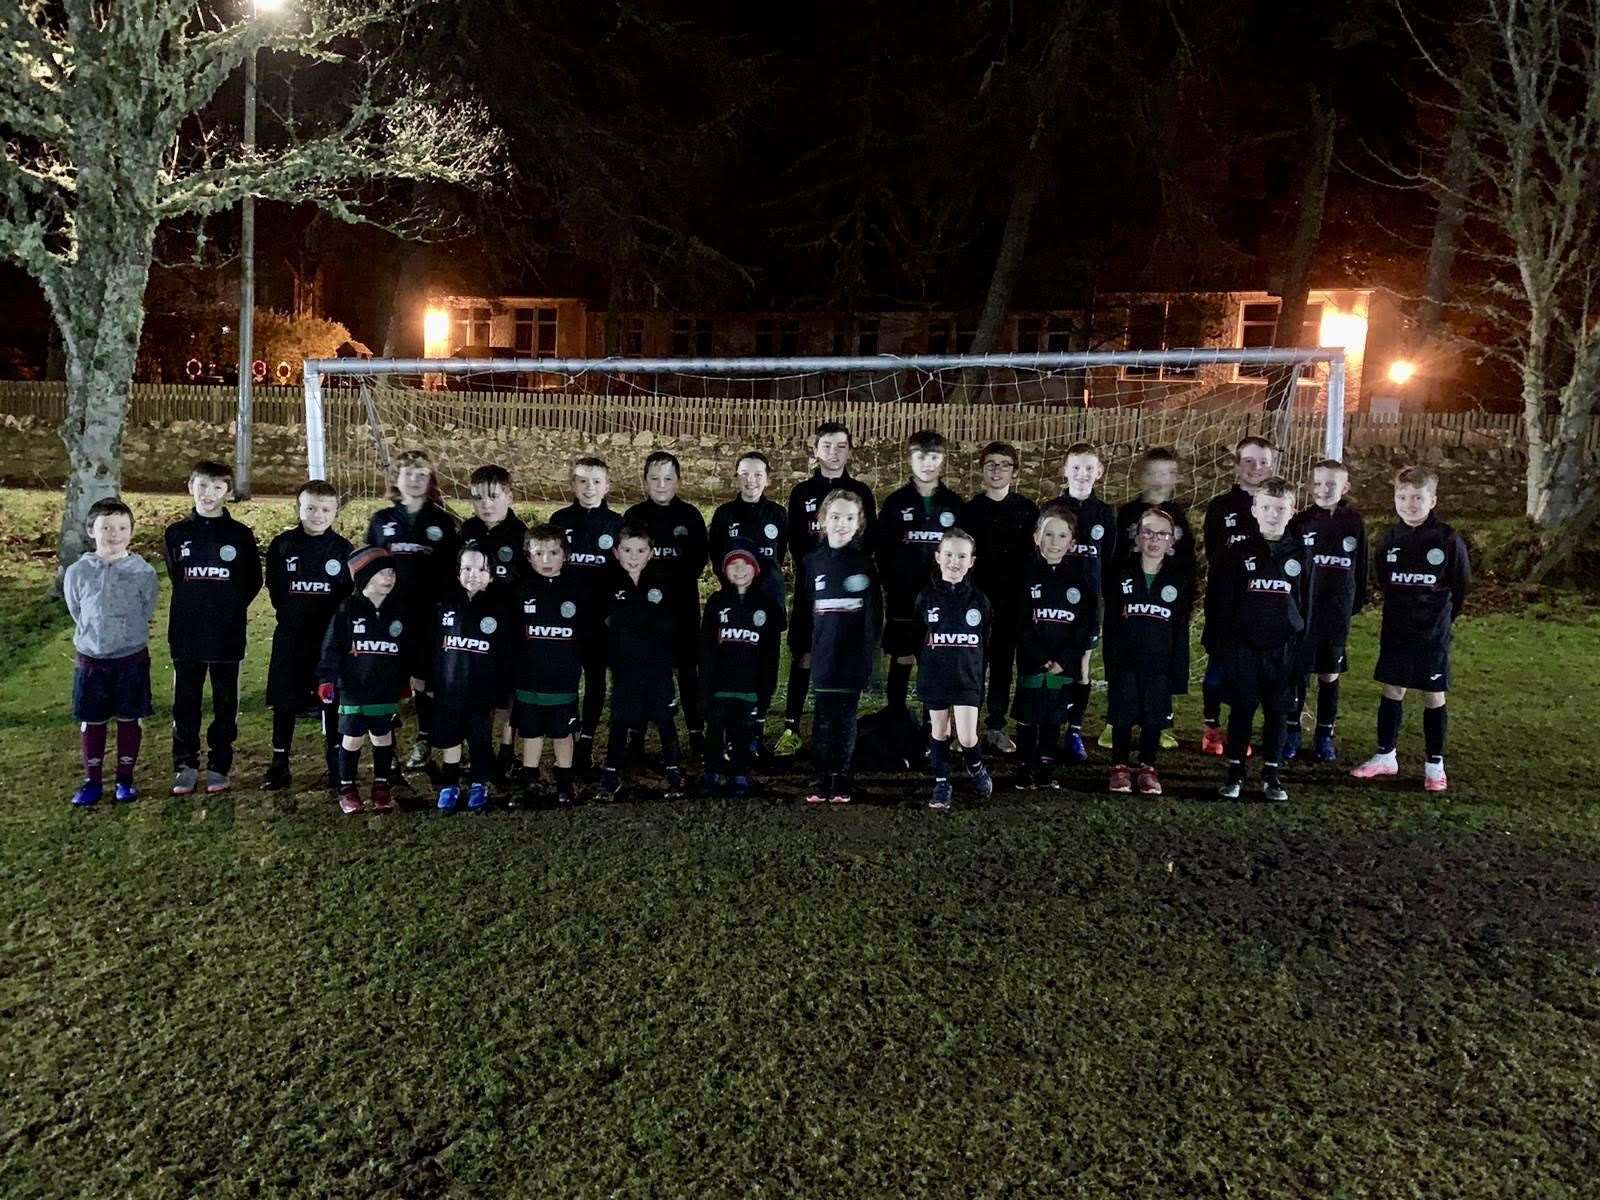 Looking smart in their new training kit are junior footballers who attend Bonar Bridge Football Club's trianing sessions. The youngsters come from all over the area.